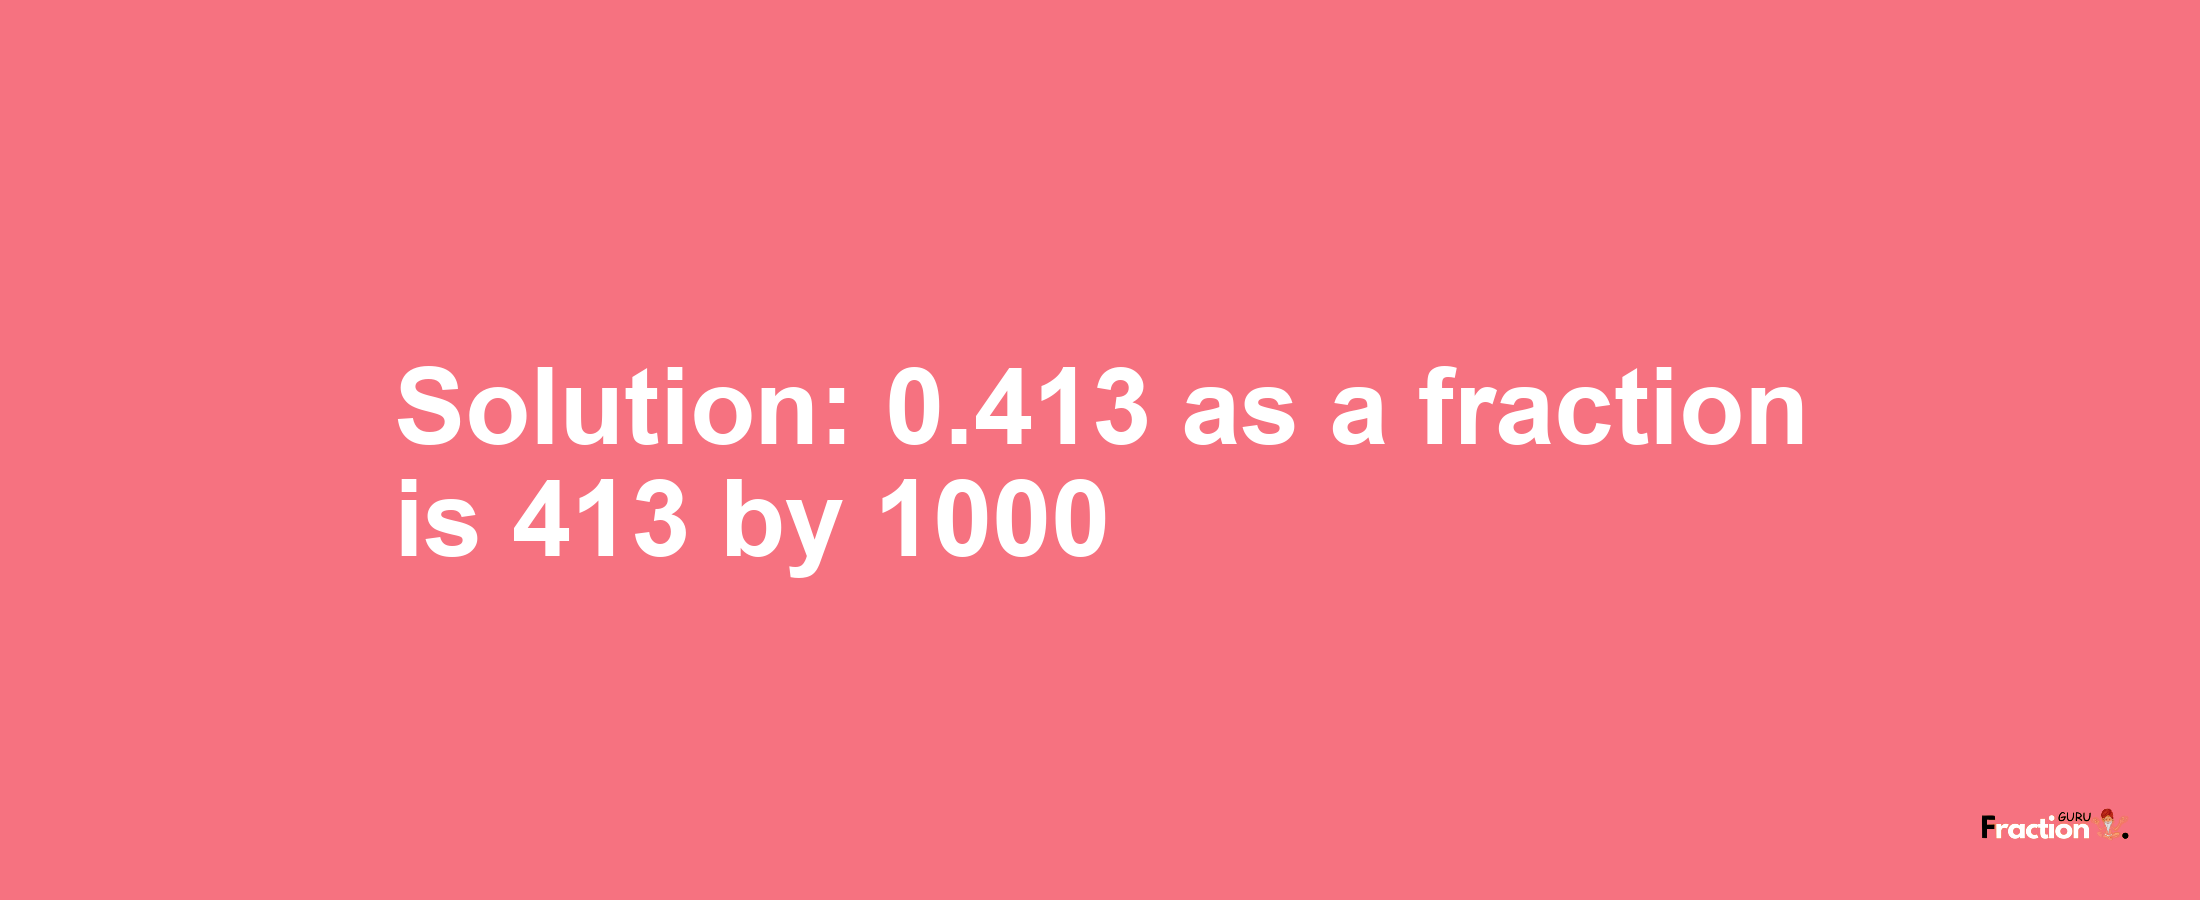 Solution:0.413 as a fraction is 413/1000